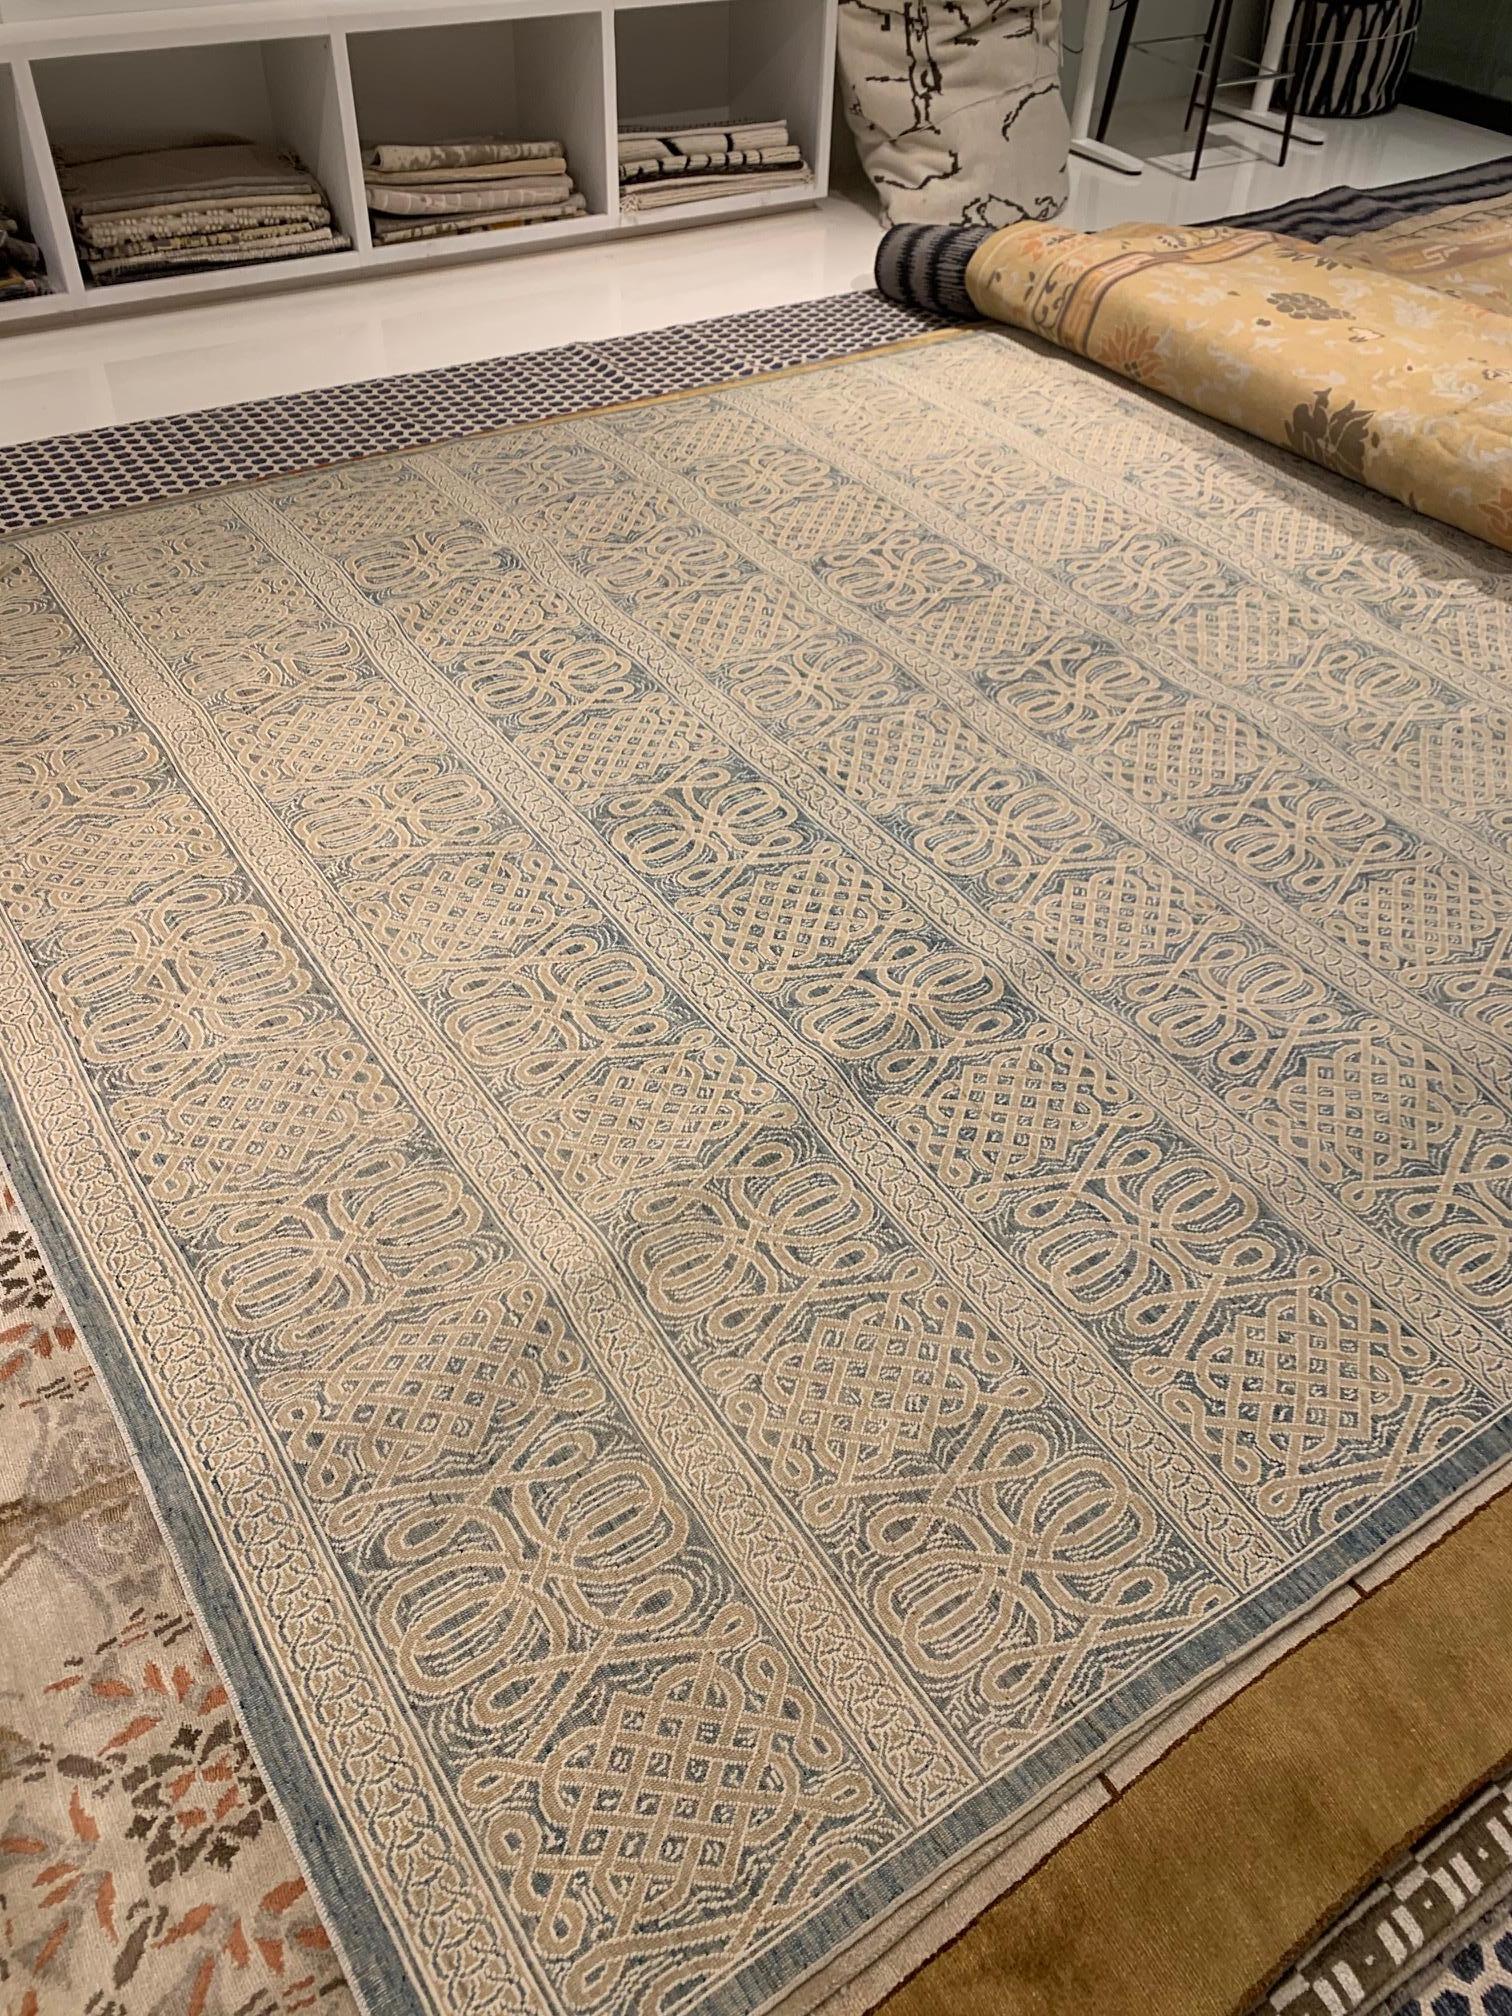 Modern Vespero beige, blue and white hand knotted wool rug by Doris Leslie Blau.
Size: 9'1